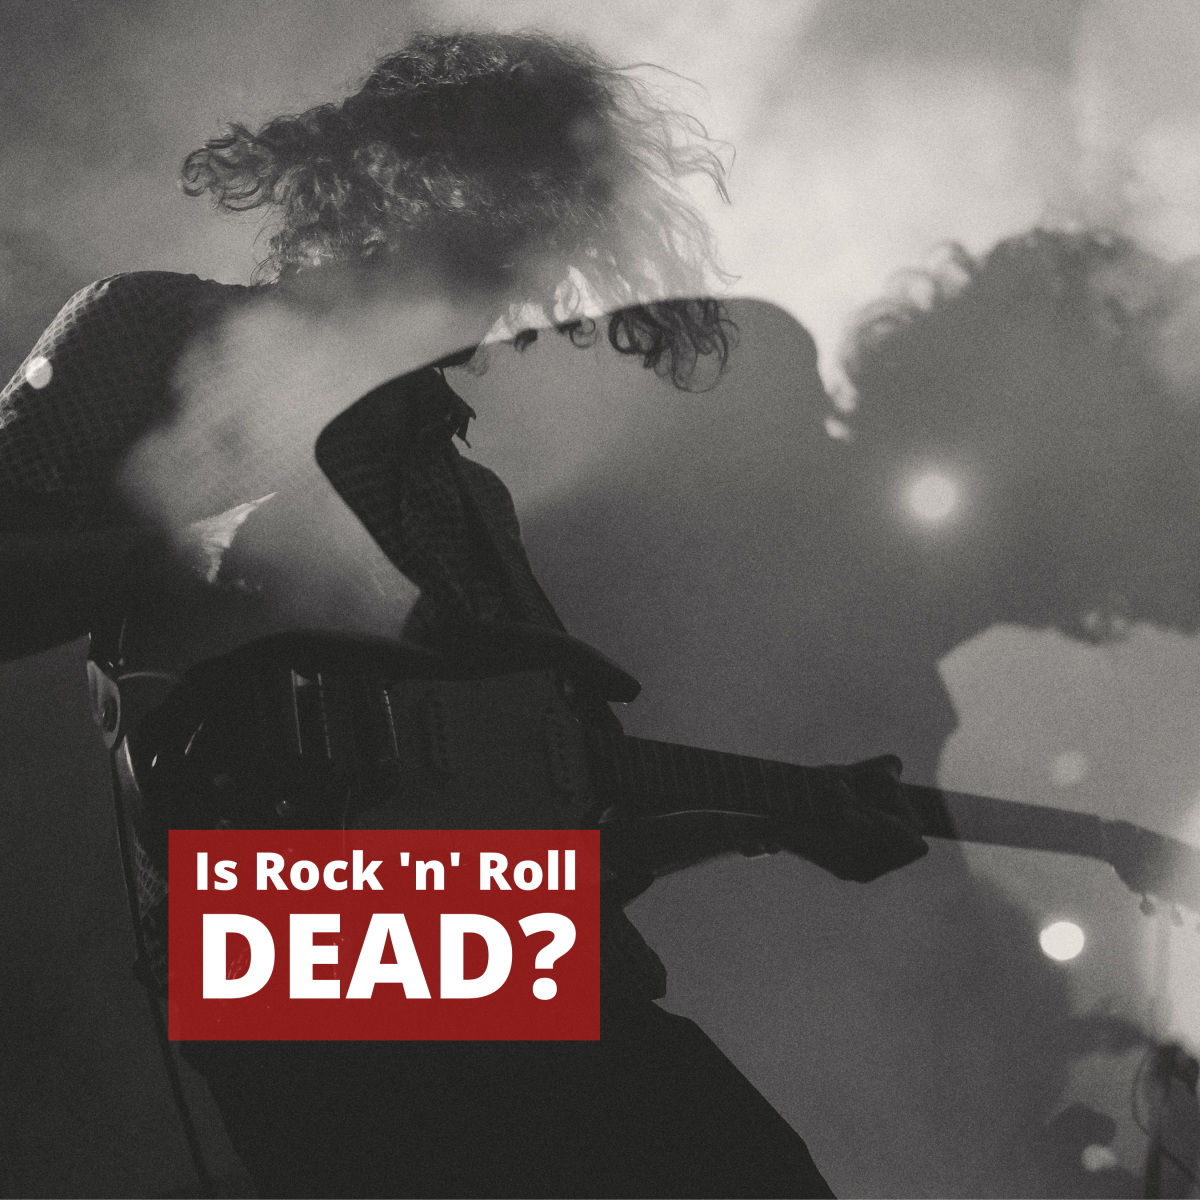 If rock is dead what can we do about it?